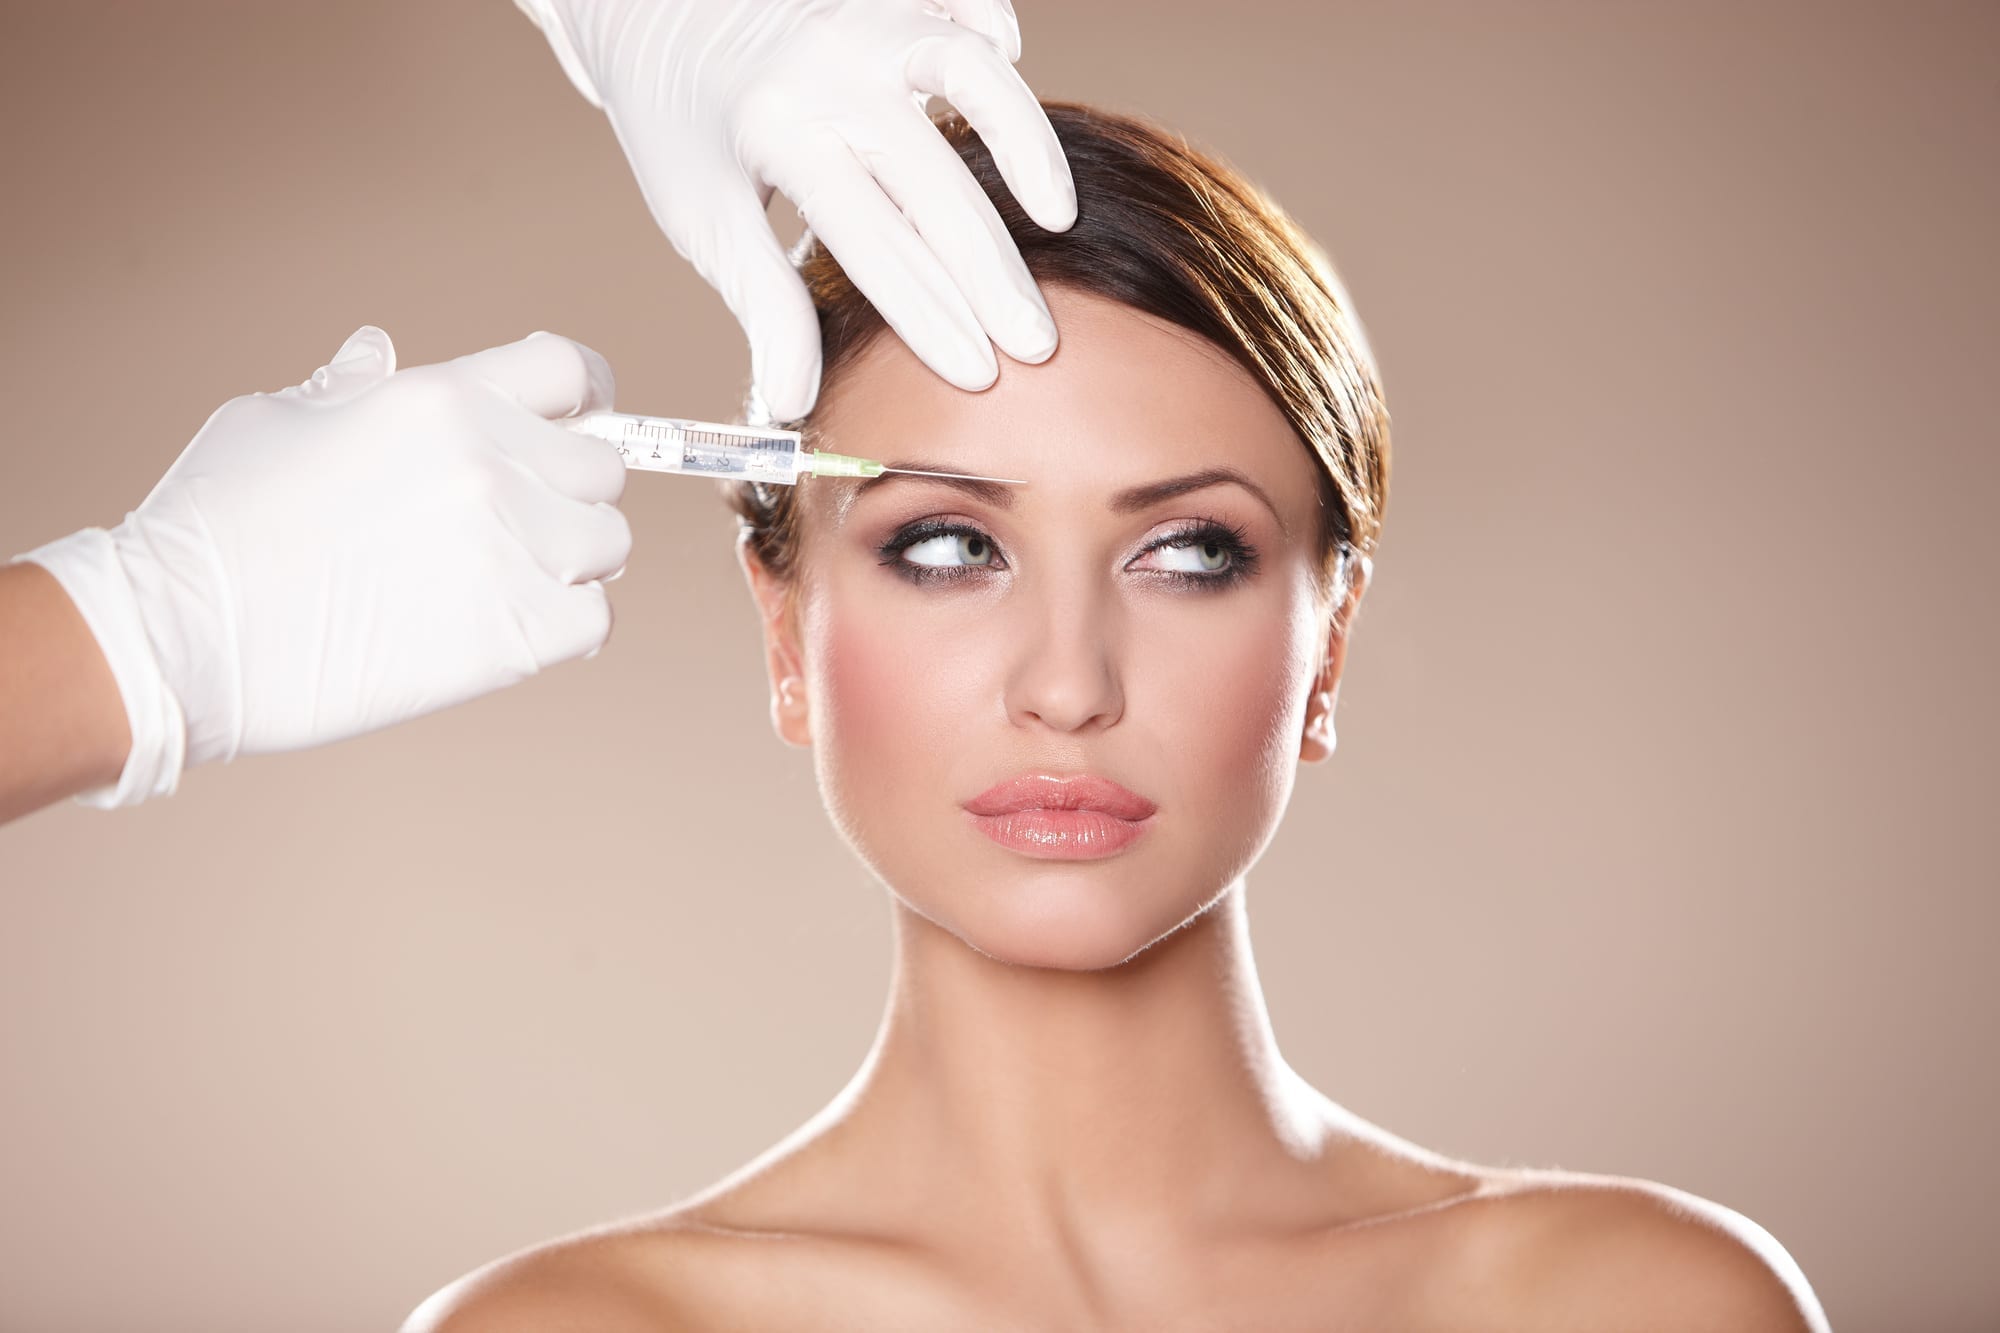 Beautiful woman gets botox injection in her face